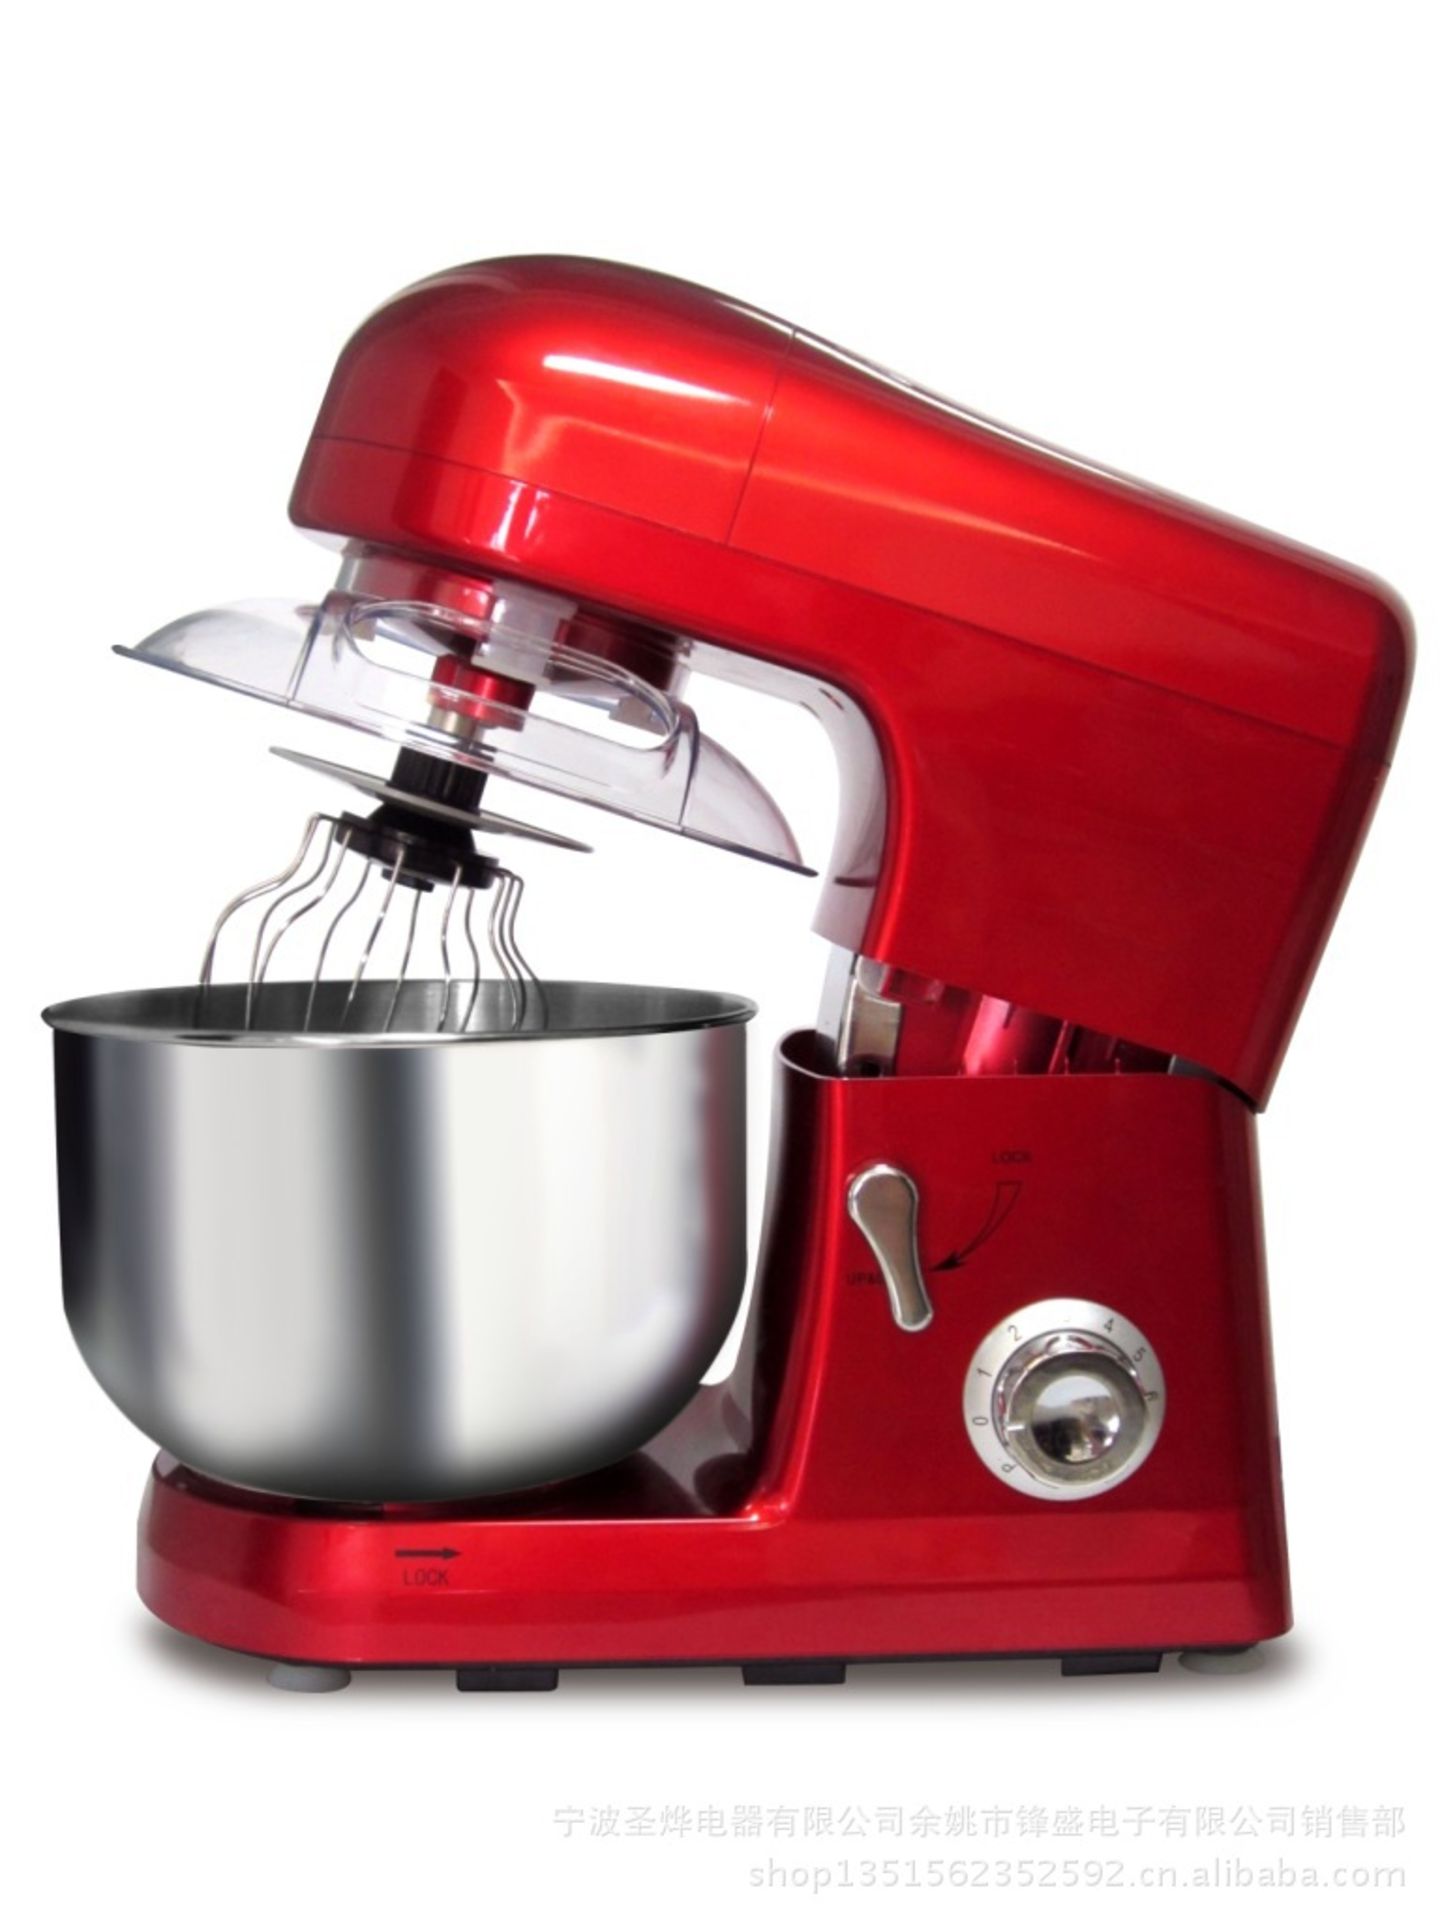 V 800w Mixer - Brushed Stainless Steel Bowl - Three Attachments - Dough Hook - Whisk - Mixing Beater